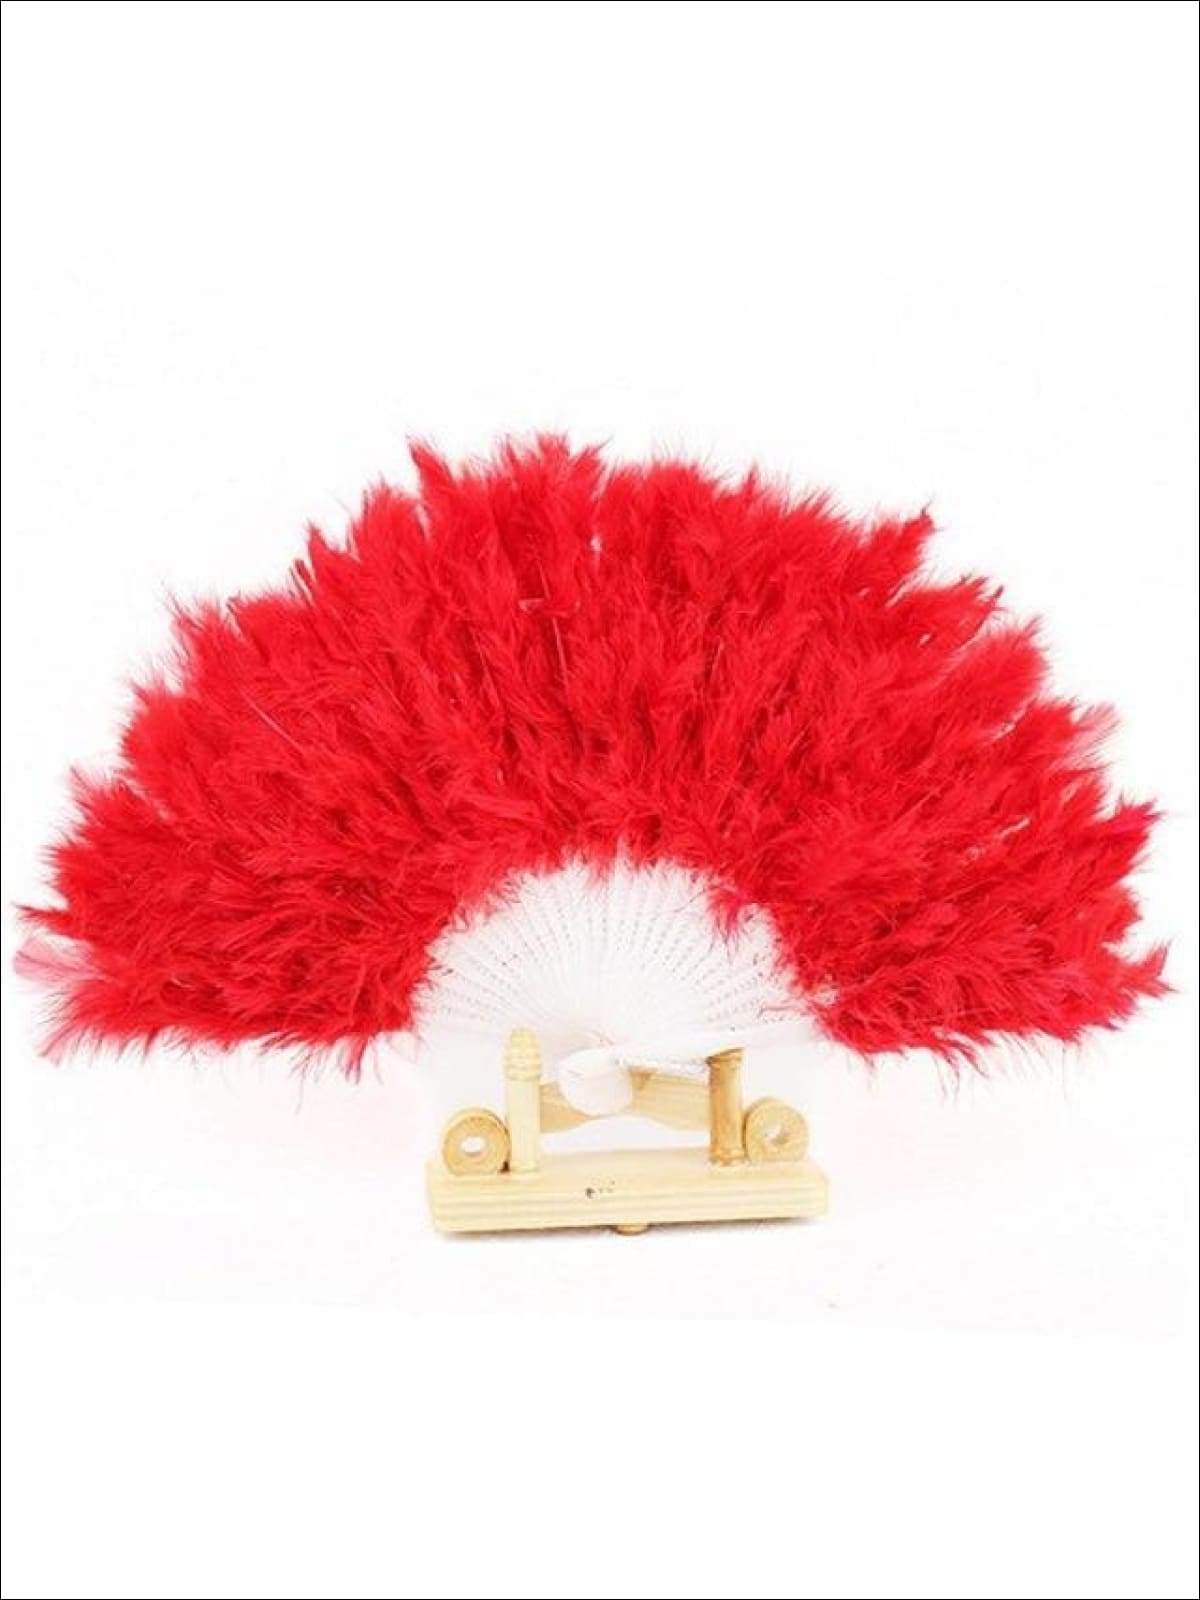 Girls Glamorous Vintage Style Feather Fan ( Multiple Color Options) - Red - Girls Halloween Costume